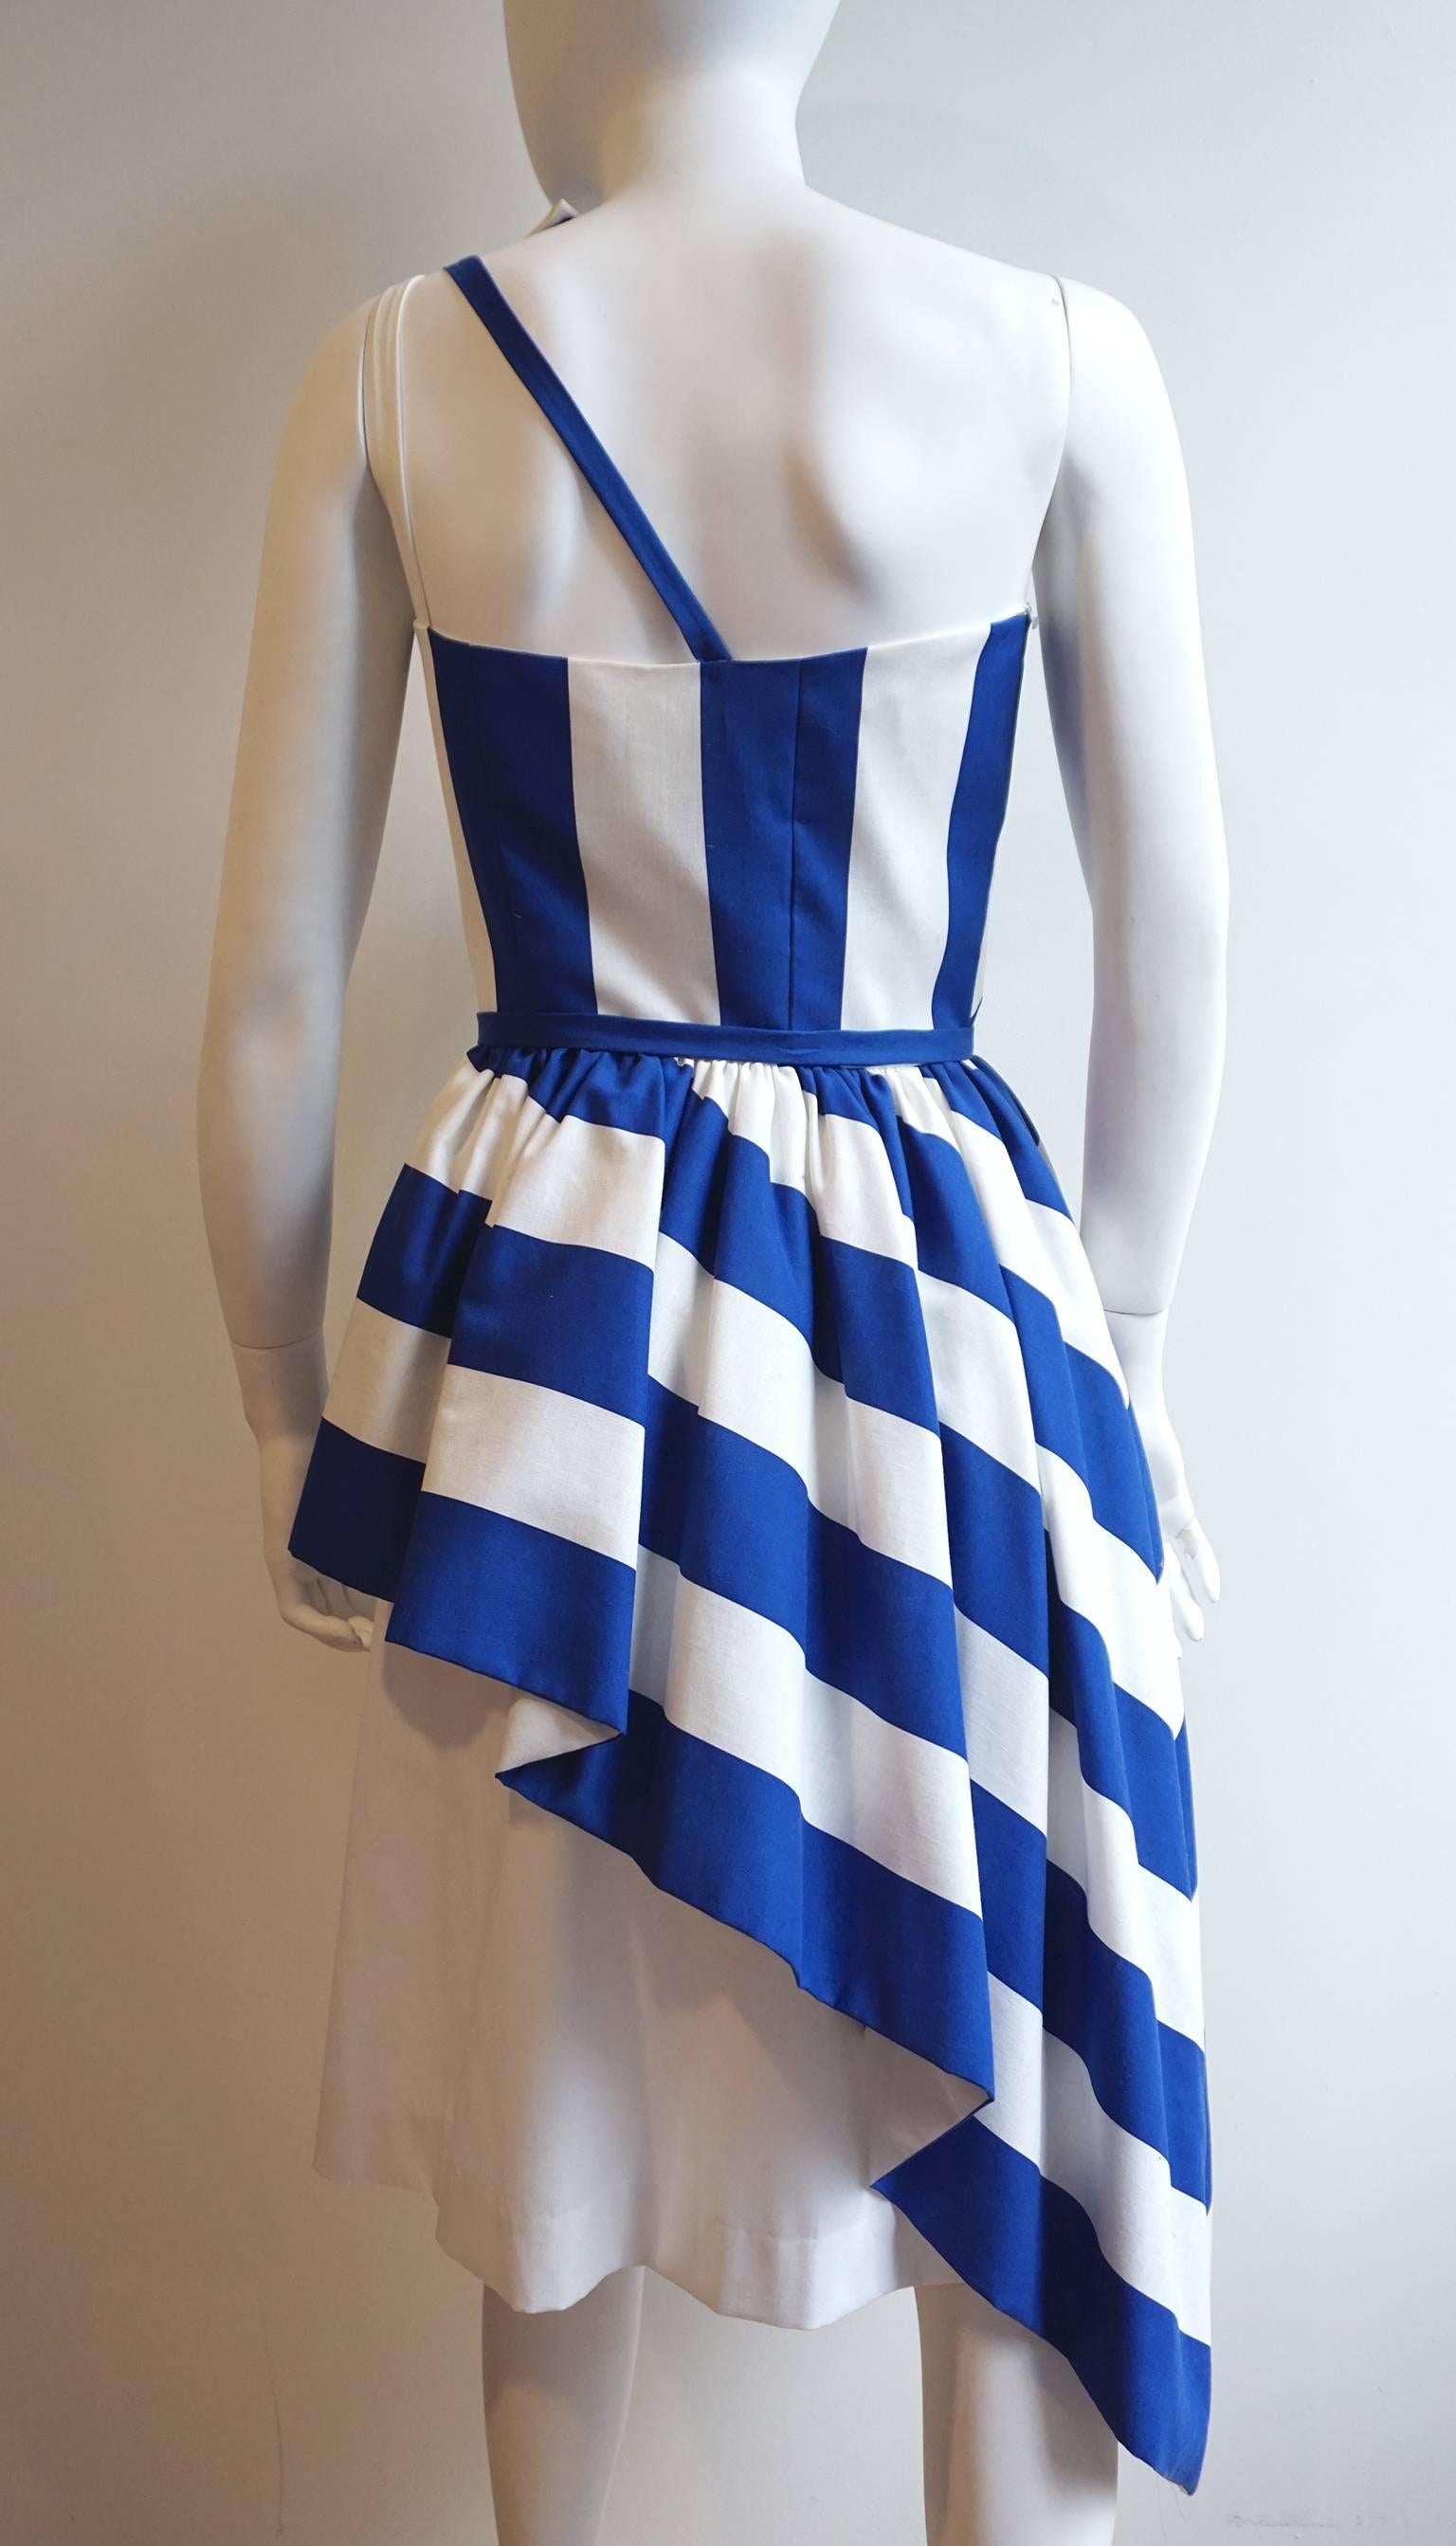 VICTOR COSTA One Shoulder Striped Cotton Cocktail Dress In Excellent Condition For Sale In New York, NY